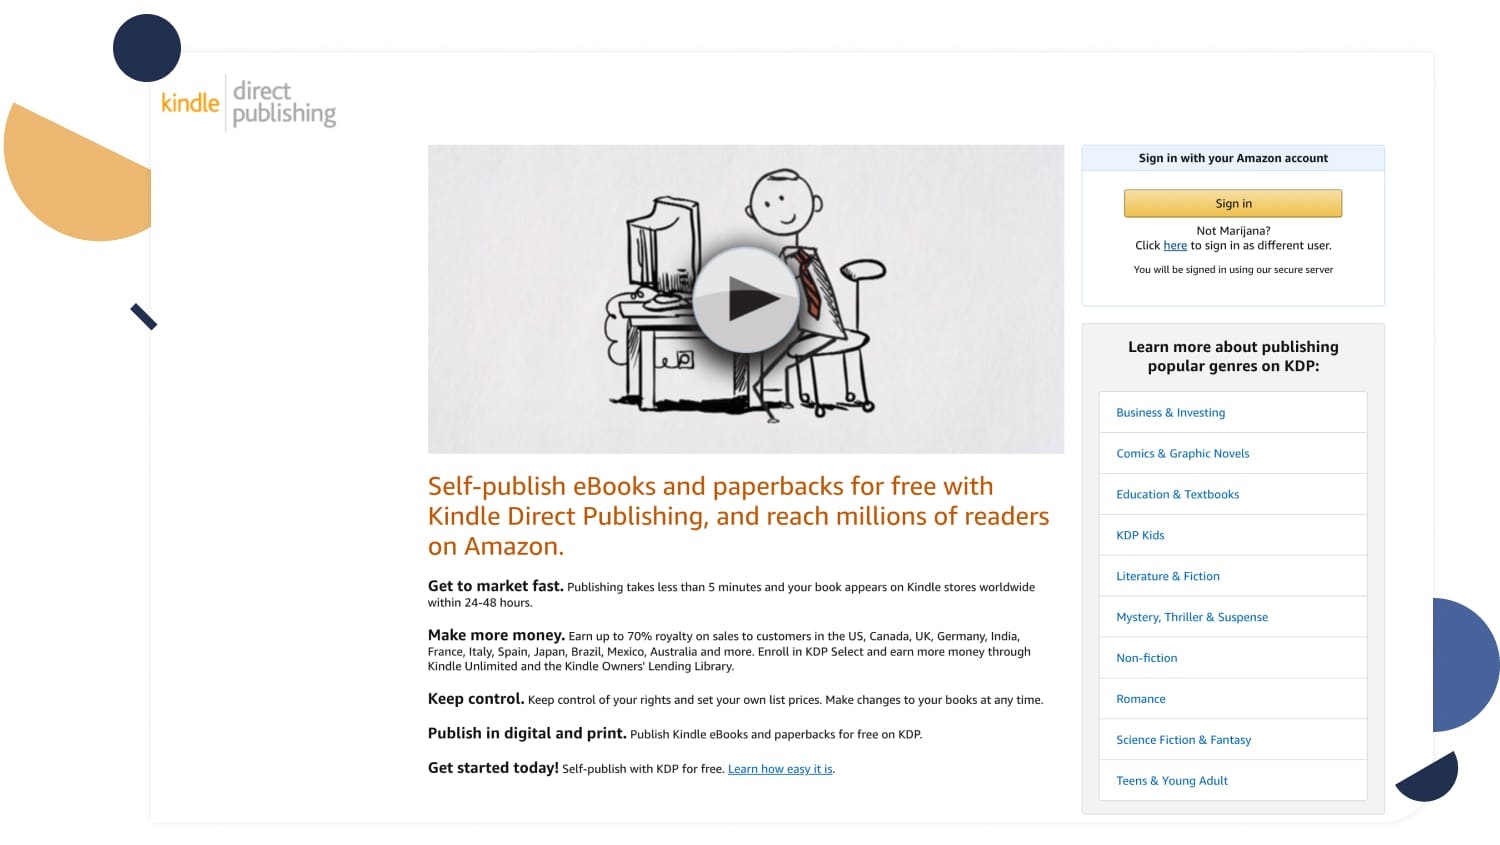 Amazon lets you sell your ebook through their Kindle Direct Publishing